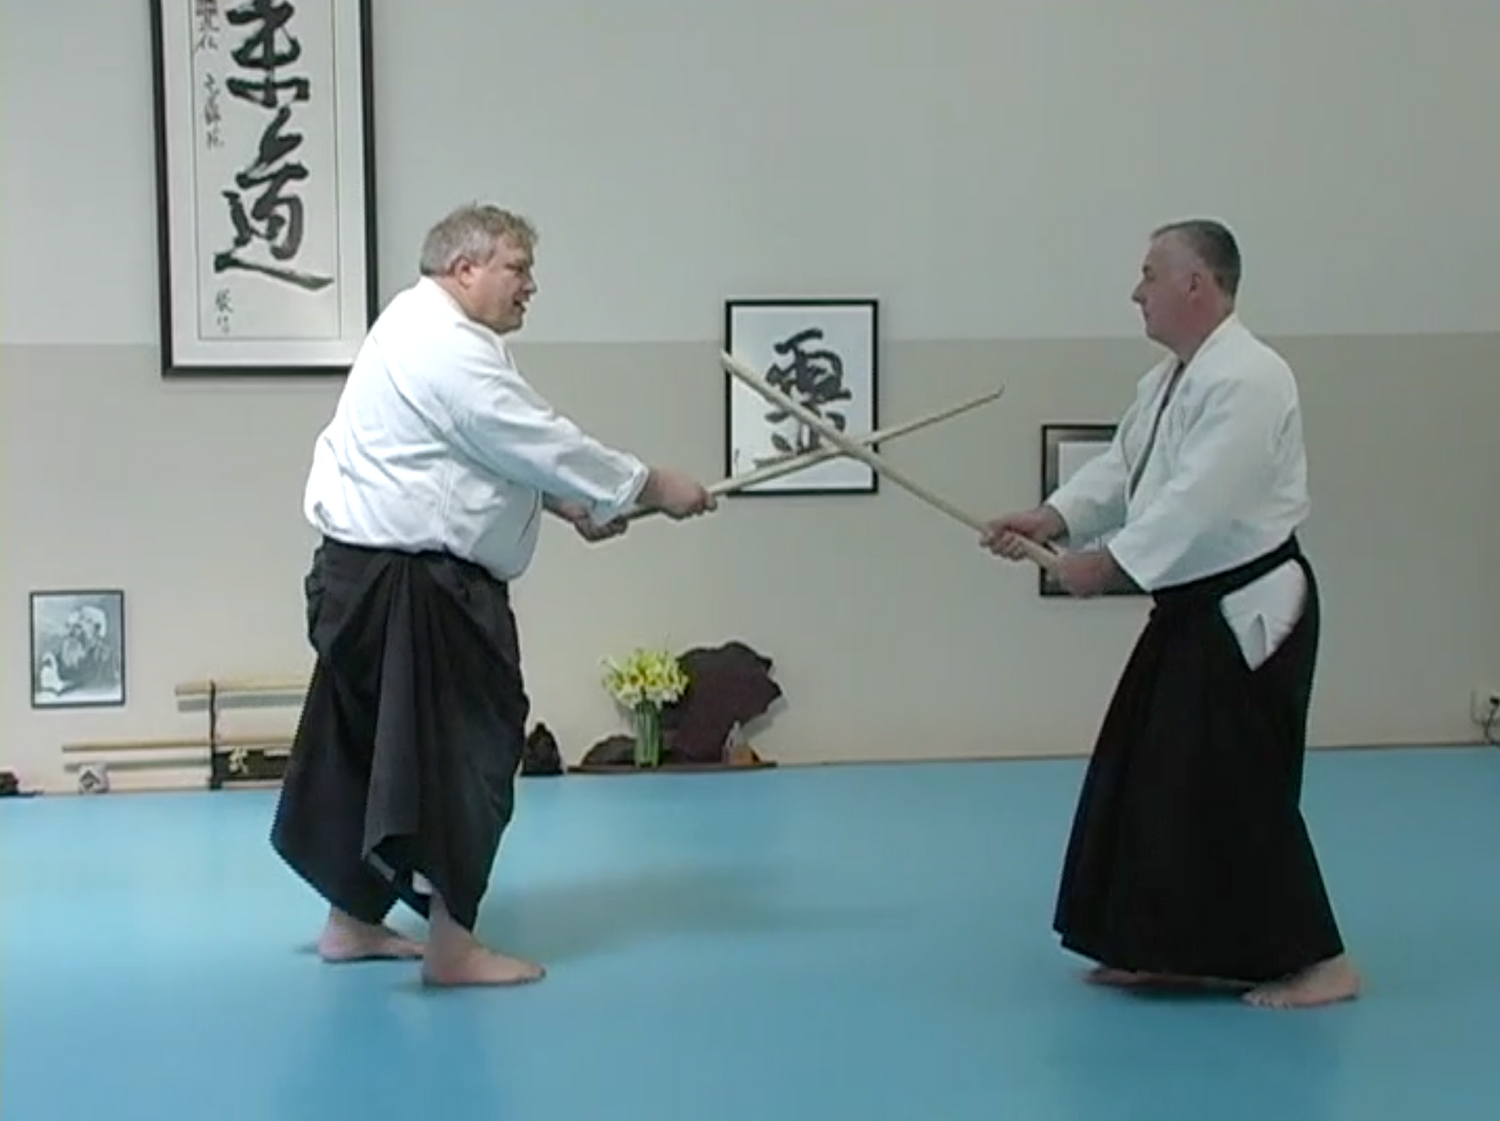 The Principles of the Aikido Sword & Saotome Sensei’s First Five Kumitachi DVD by George Ledyard (Preowned) - Budovideos